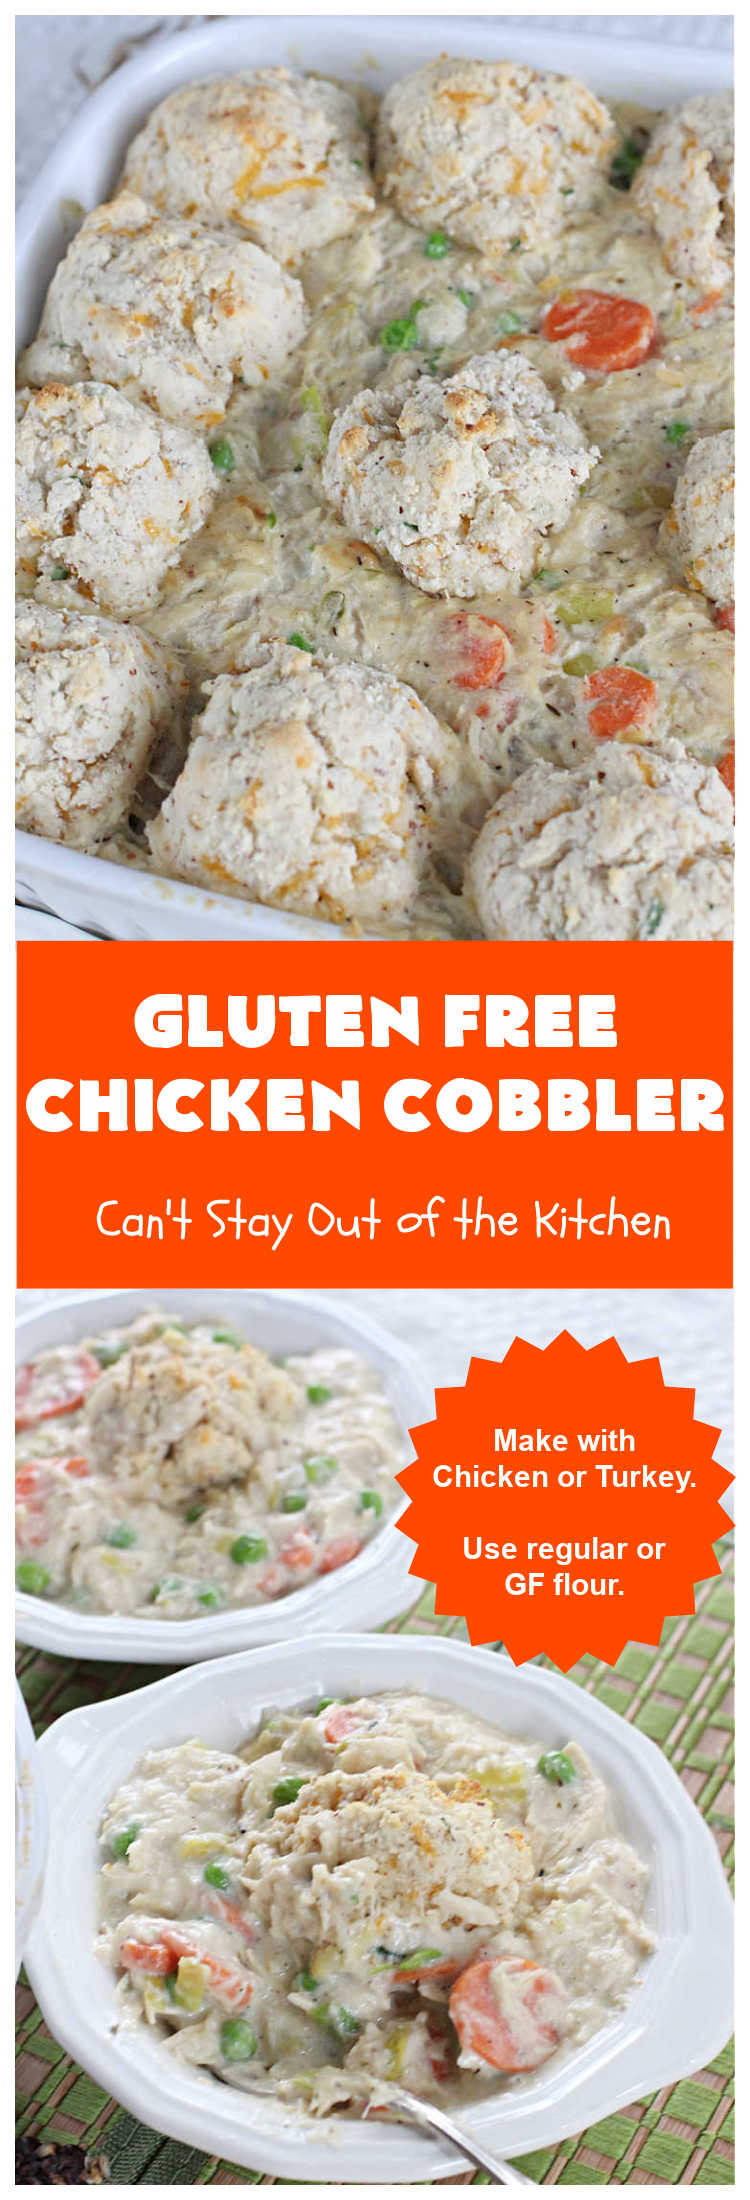 Gluten Free Chicken Cobbler | Can't Stay Out of the Kitchen | this #ChickenCobbler can't be beat! It's fantastic with #chicken or #turkey & can be made #GlutenFree or NOT - as you prefer. Terrific way to use up leftover rotisserie chicken or #Thanksgiving turkey. Our family loves this #recipe. #GlutenFreeChickenCobbler #ChickenPotPie #ChickenAndDumplingsGluten Free Chicken Cobbler | Can't Stay Out of the Kitchen | this #ChickenCobbler can't be beat! It's fantastic with #chicken or #turkey & can be made #GlutenFree or NOT - as you prefer. Terrific way to use up leftover rotisserie chicken or #Thanksgiving turkey. Our family loves this #recipe. #GlutenFreeChickenCobbler #ChickenPotPie #ChickenAndDumplings